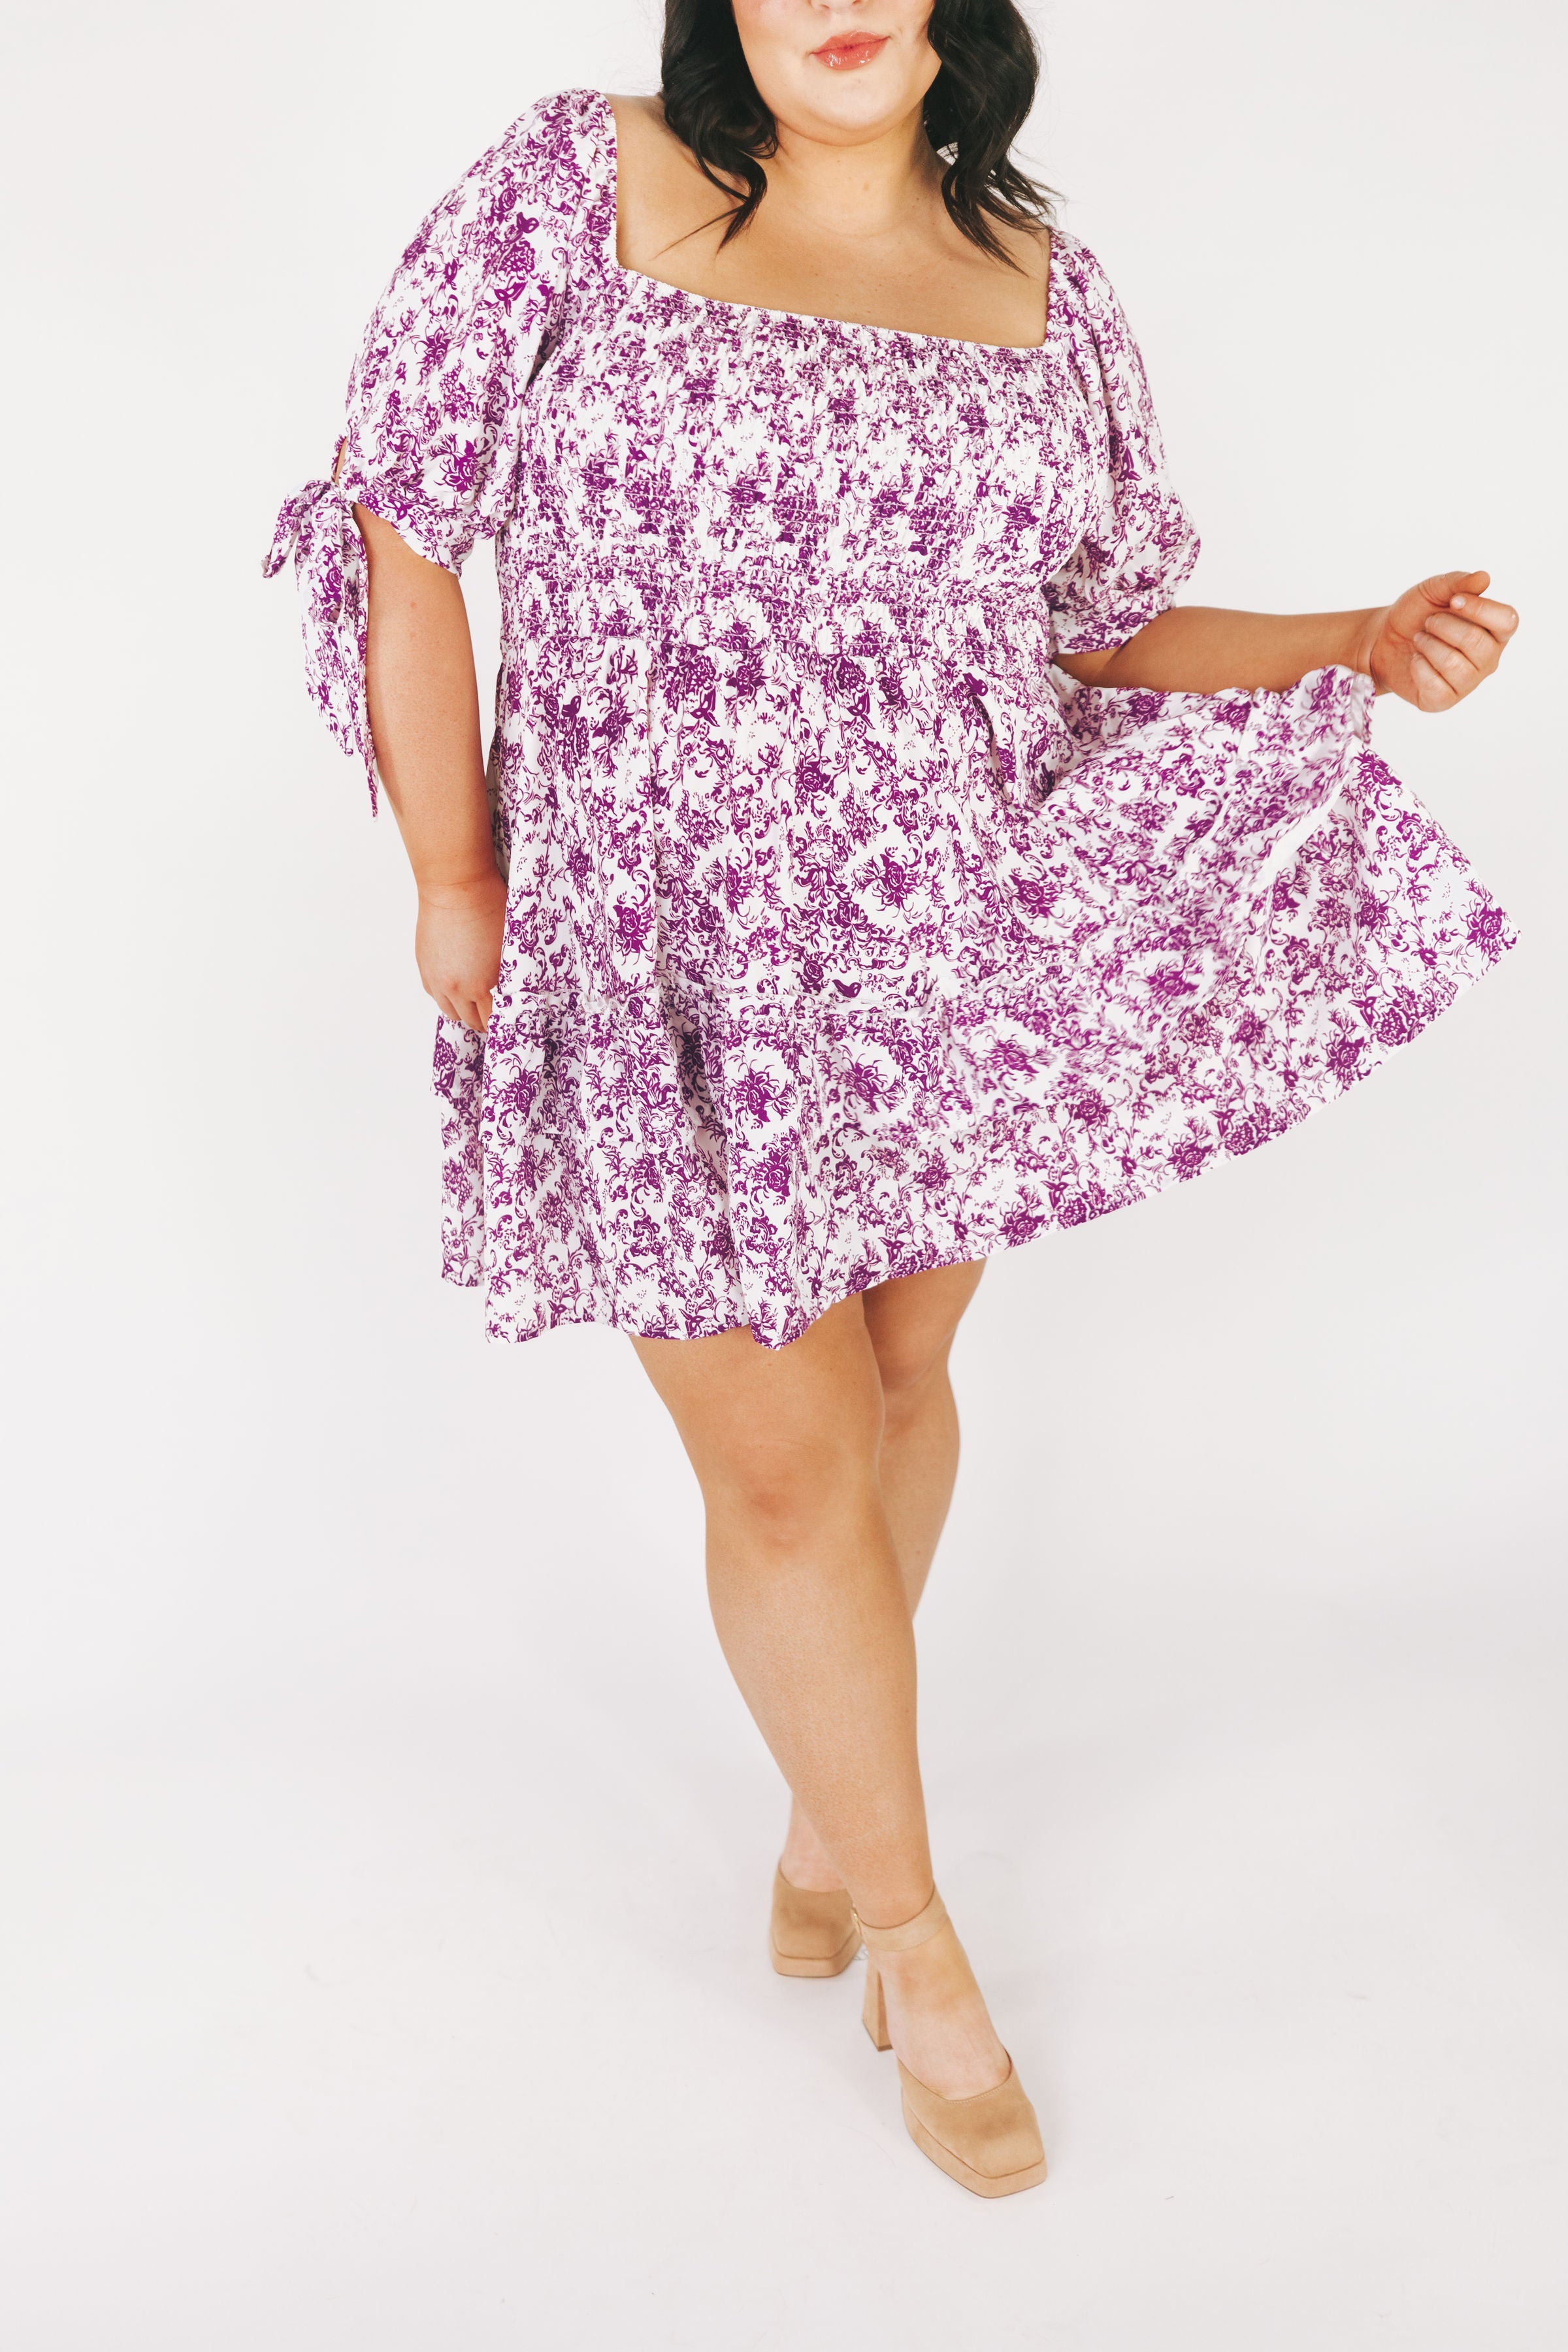 PLUS SIZE - Maybe It's Time Dress